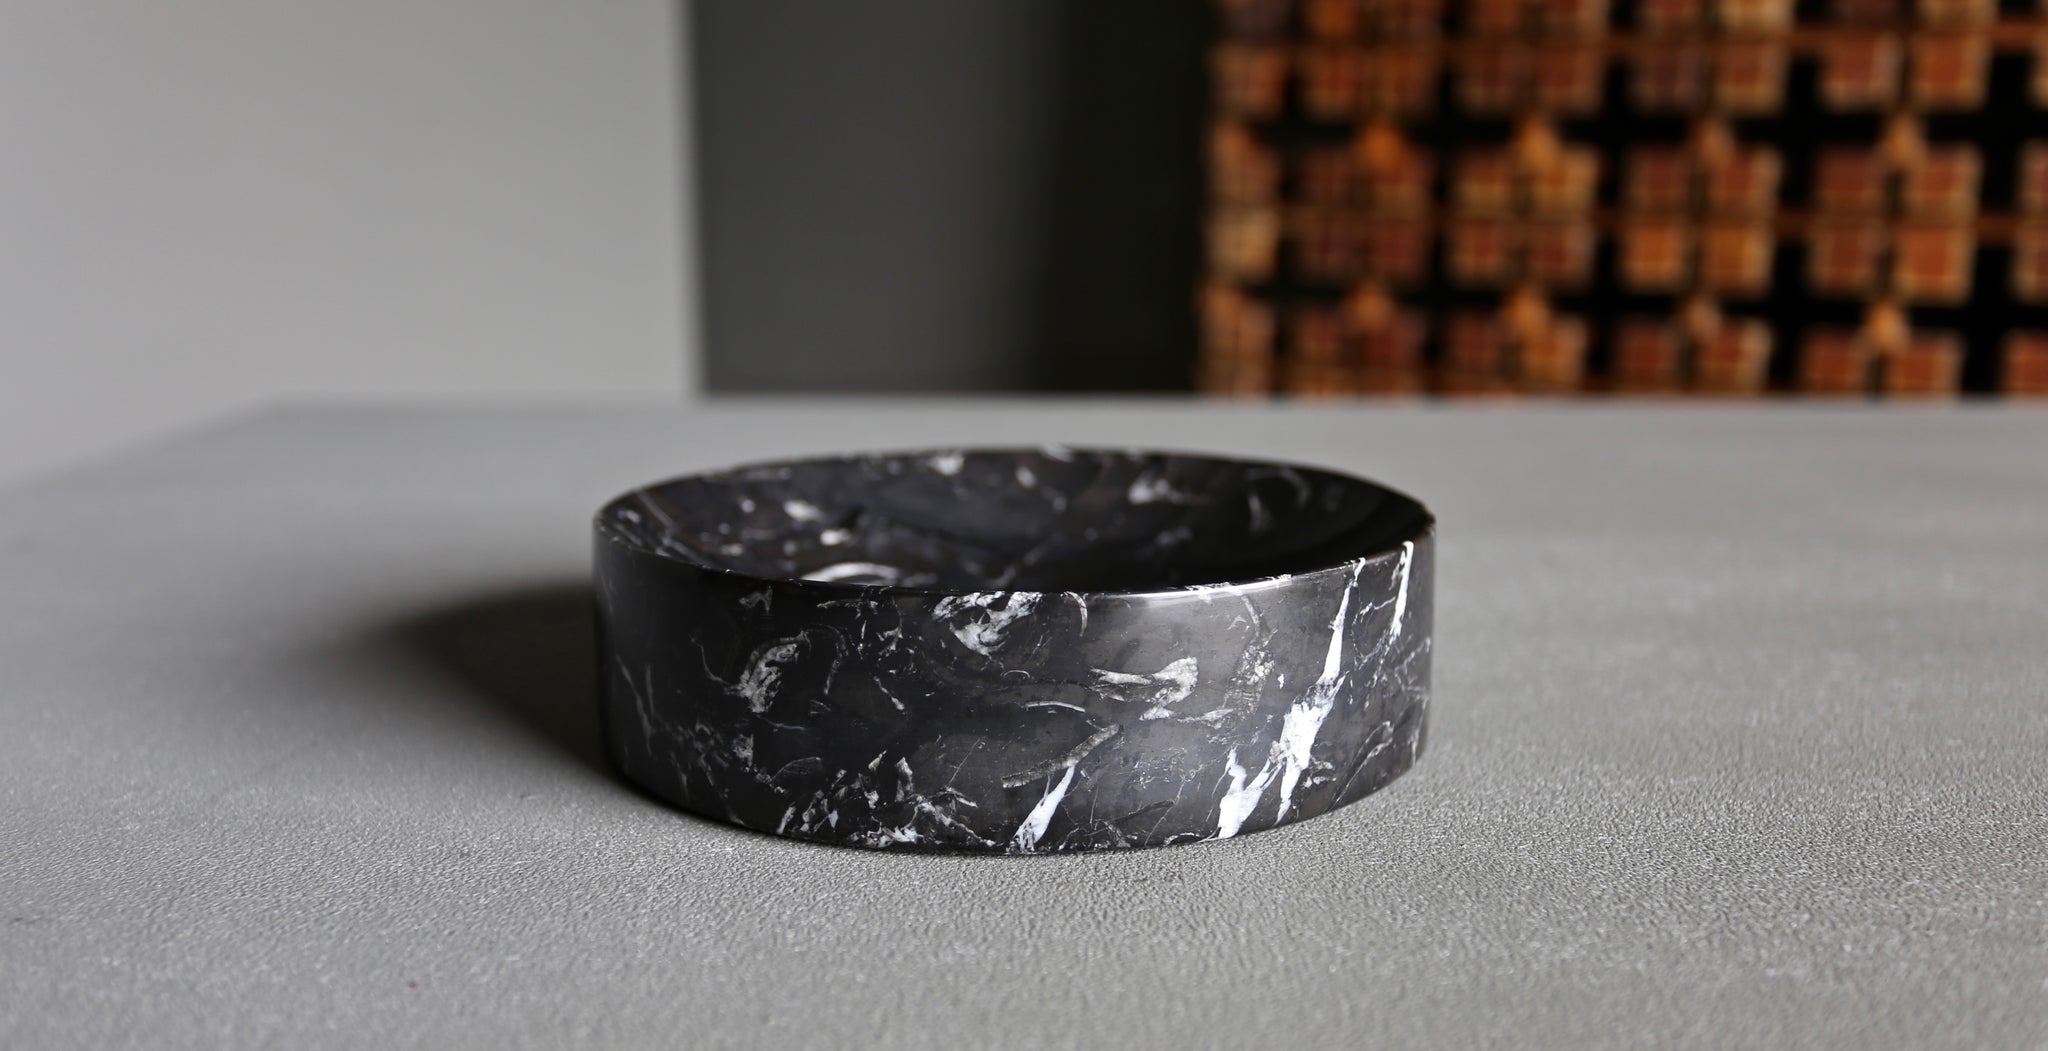 = SOLD = Peter Pepper Black Marble Bowl circa 1975